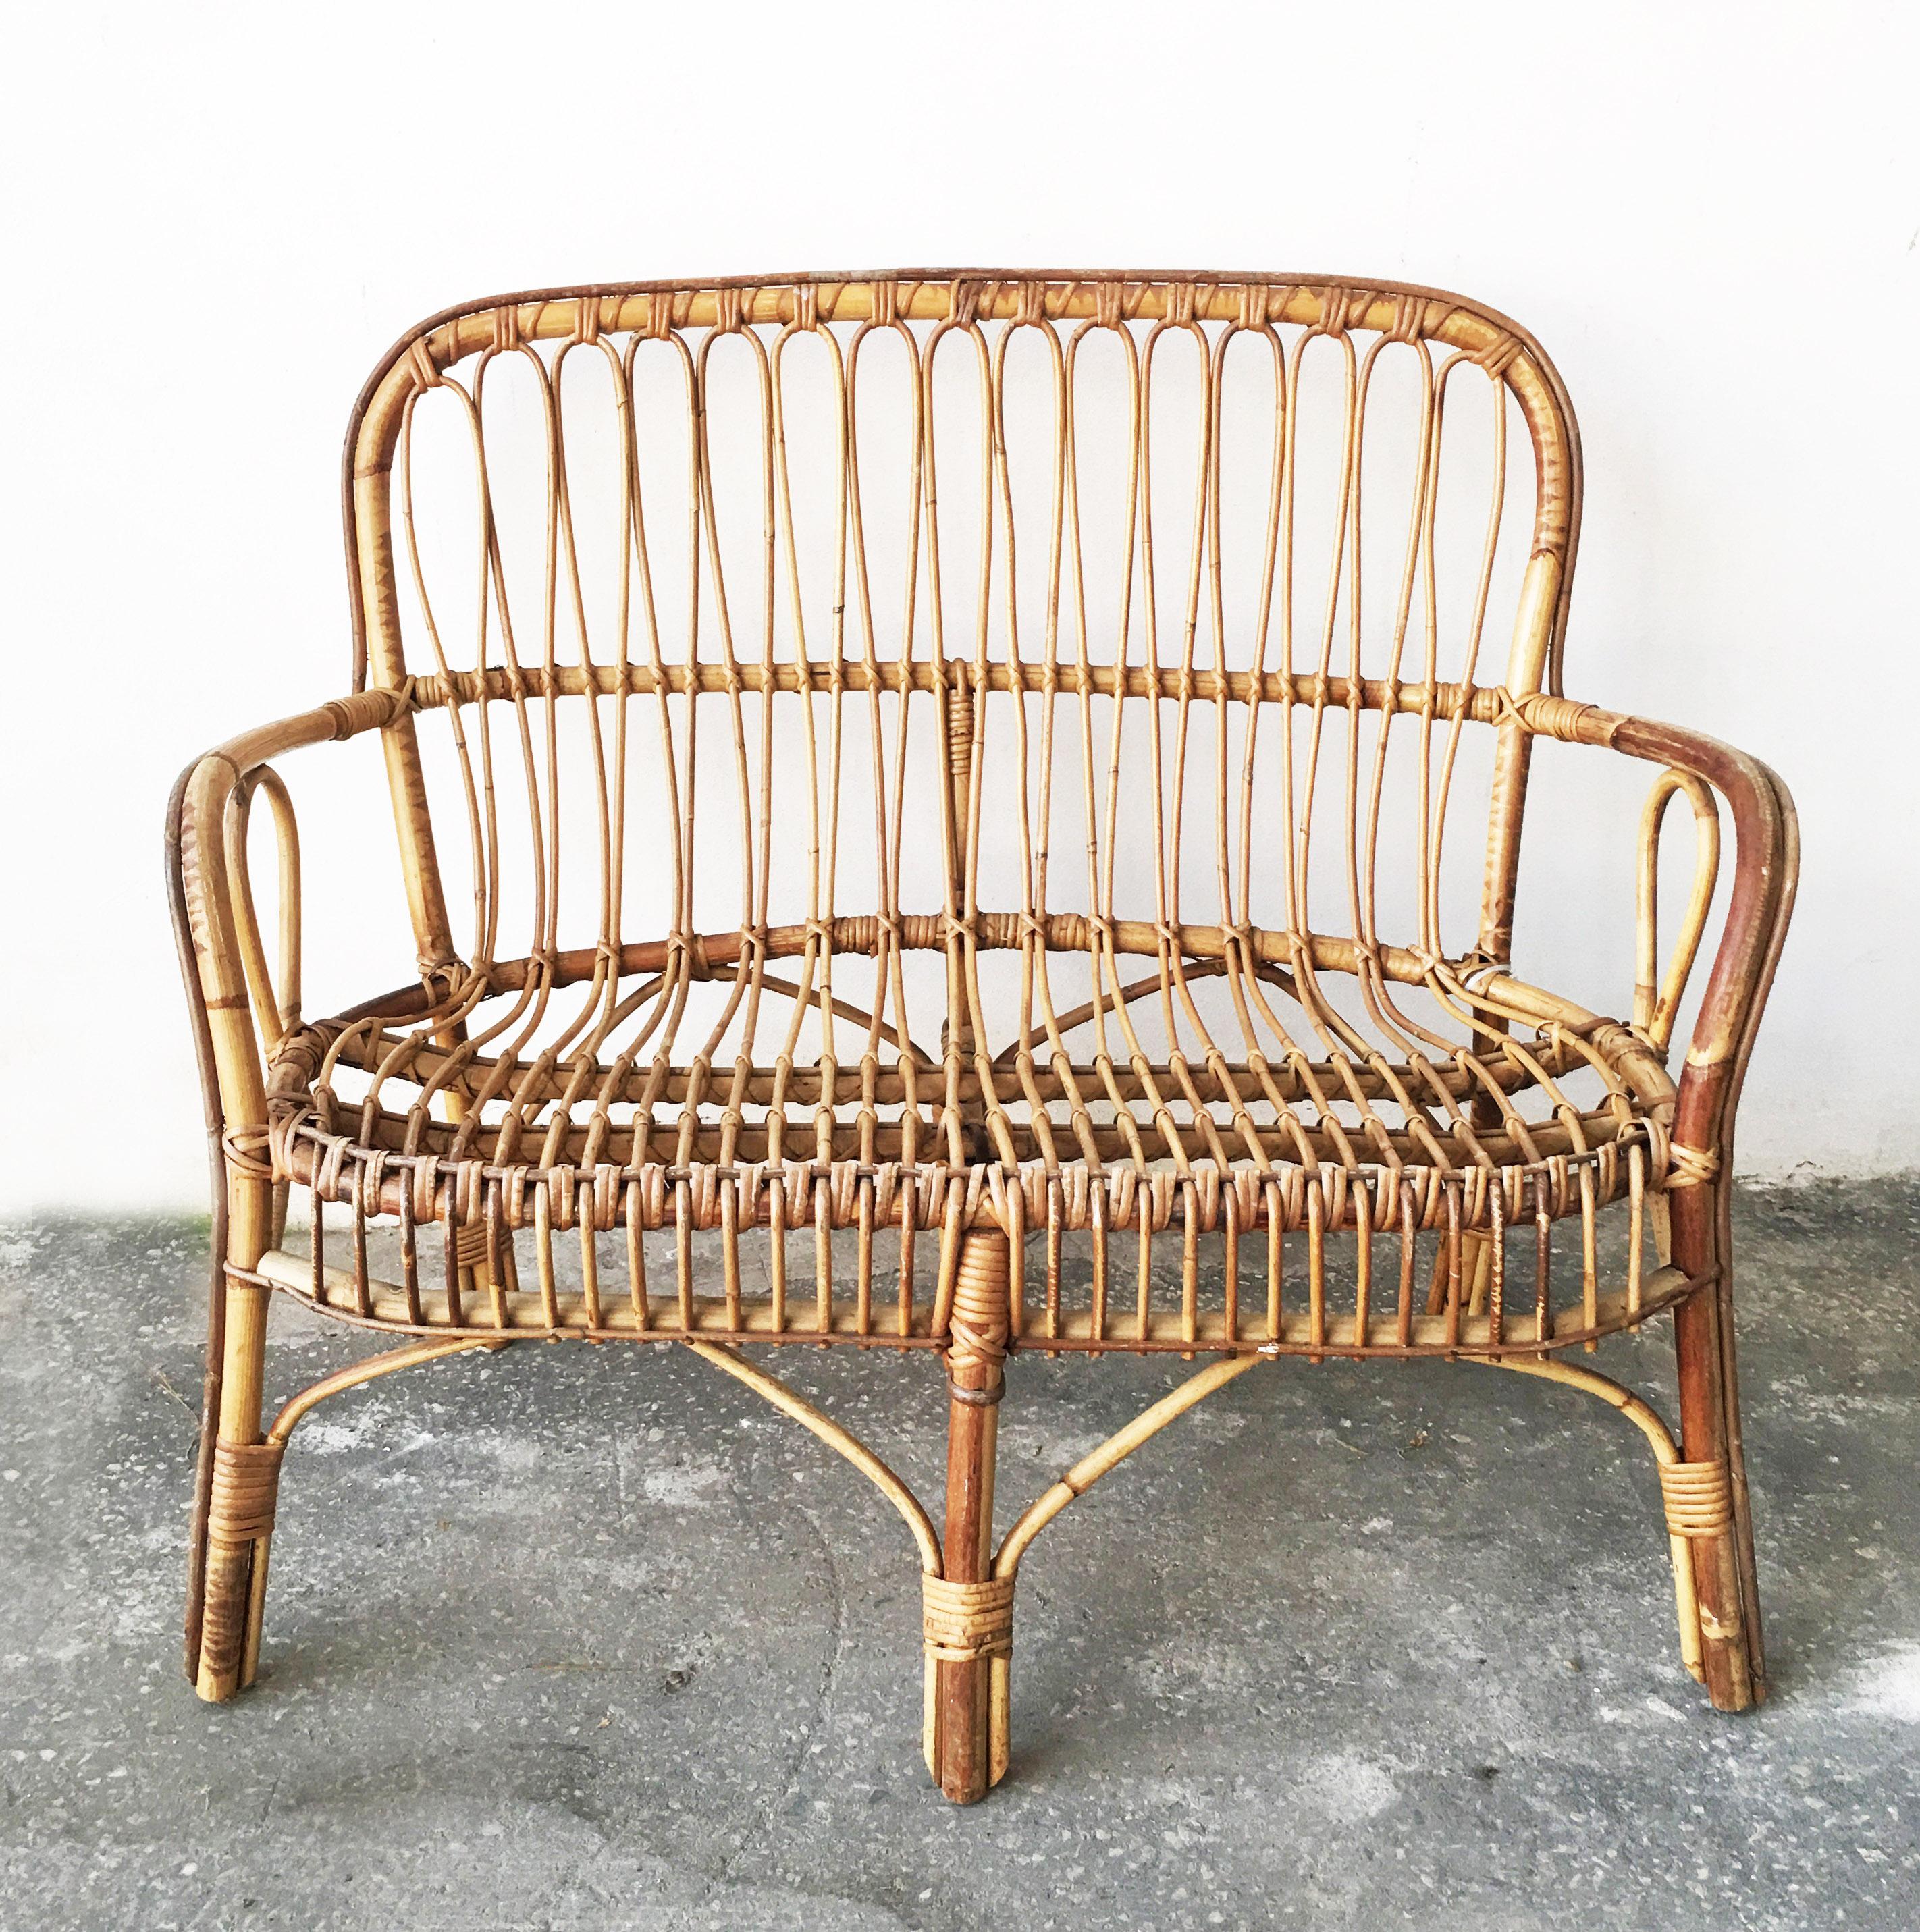 Italian Classic sofa in bamboo and rattan with curved twine is completely restored.
The furniture presents a beautiful curved twine made with little Rattan canes.
It has two seats and it is from 1950s.
 